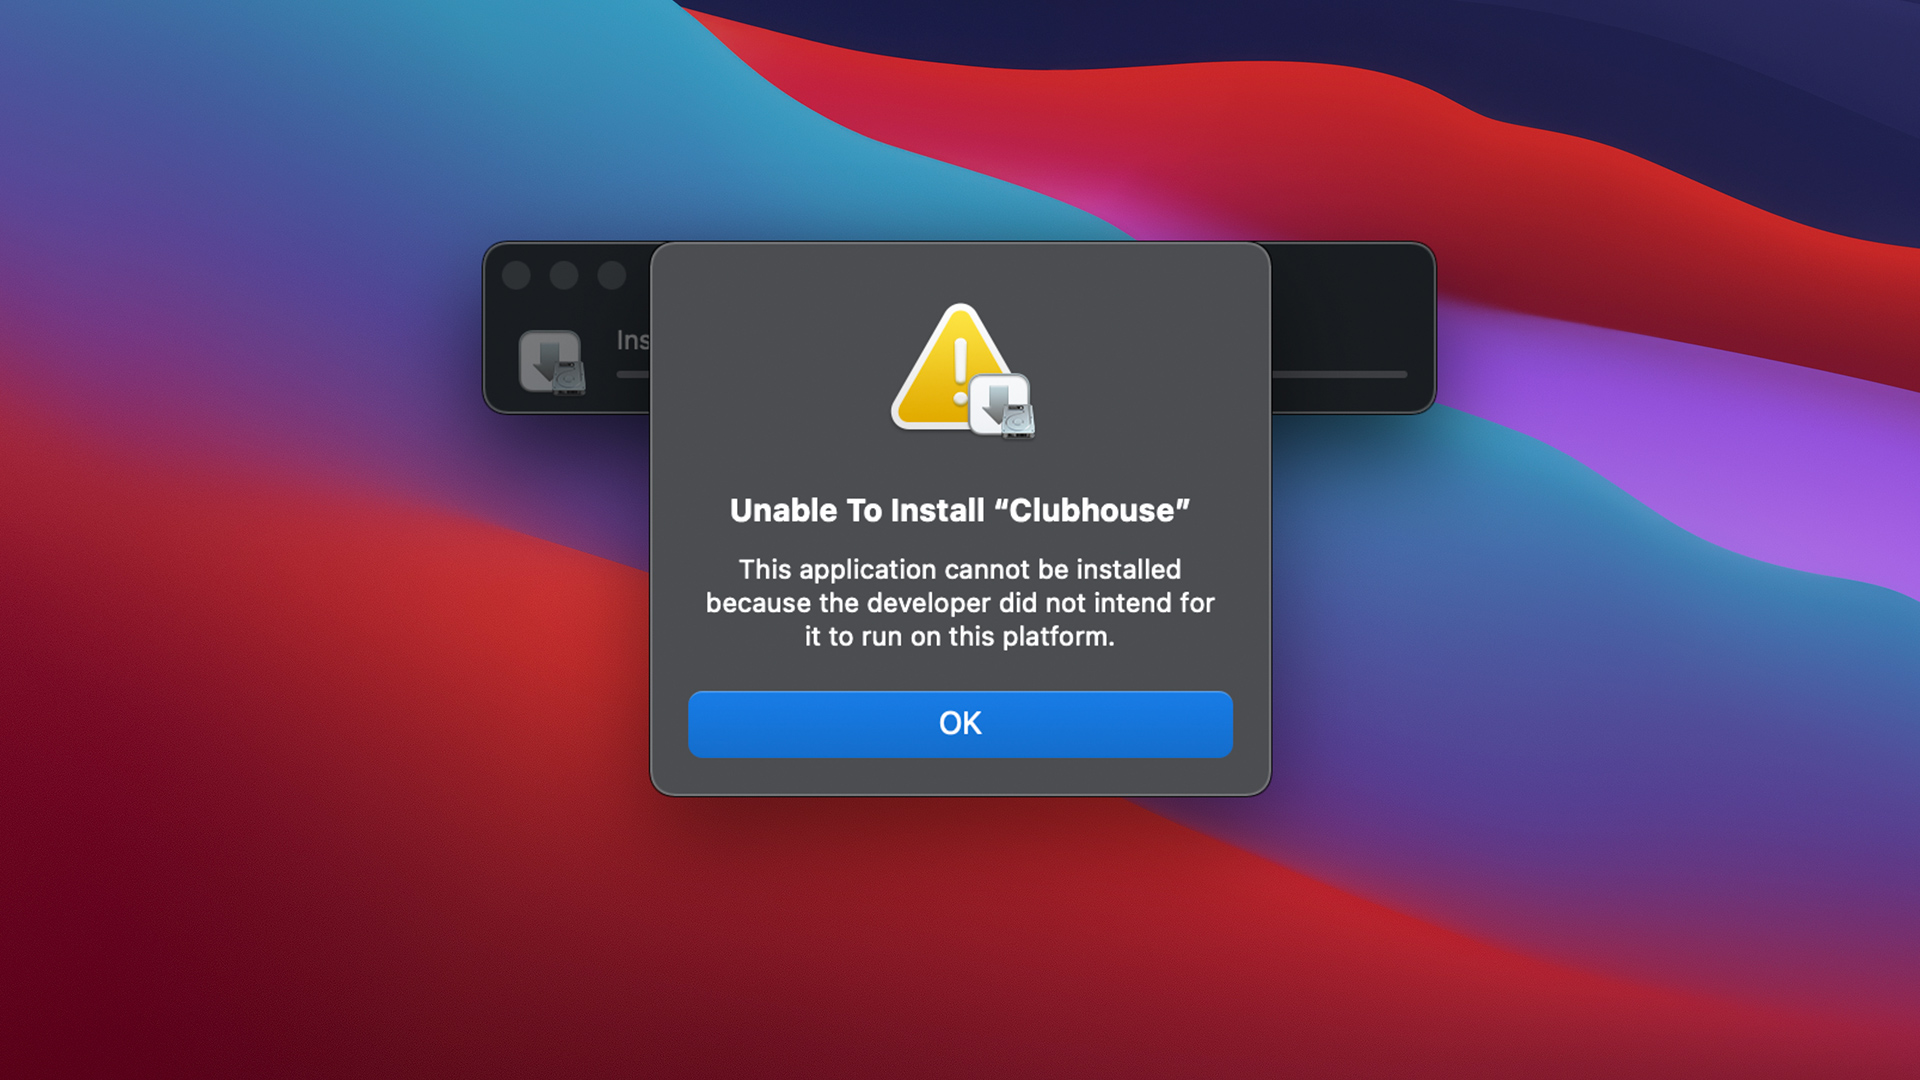 can you install an app on an ipad that was intended for mac?